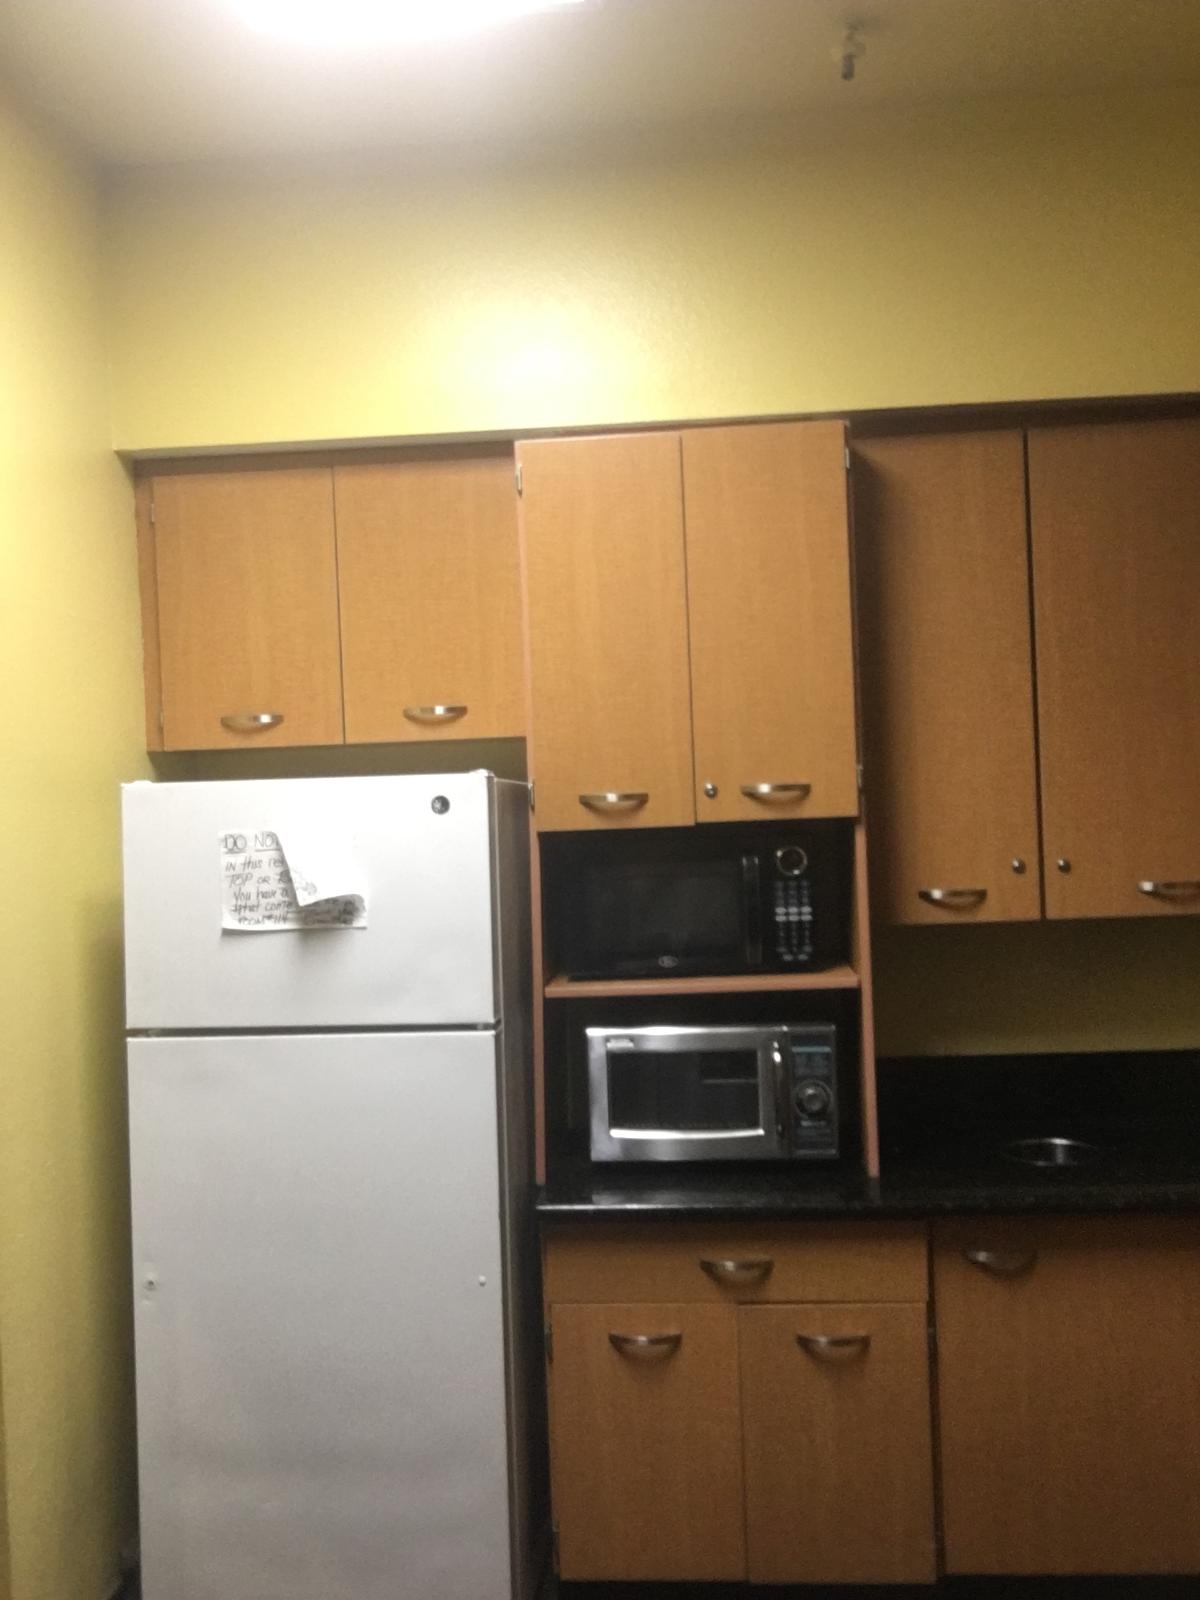 Photo of Kitchen area with kitchen cabinets, sink and two microwave ovens.